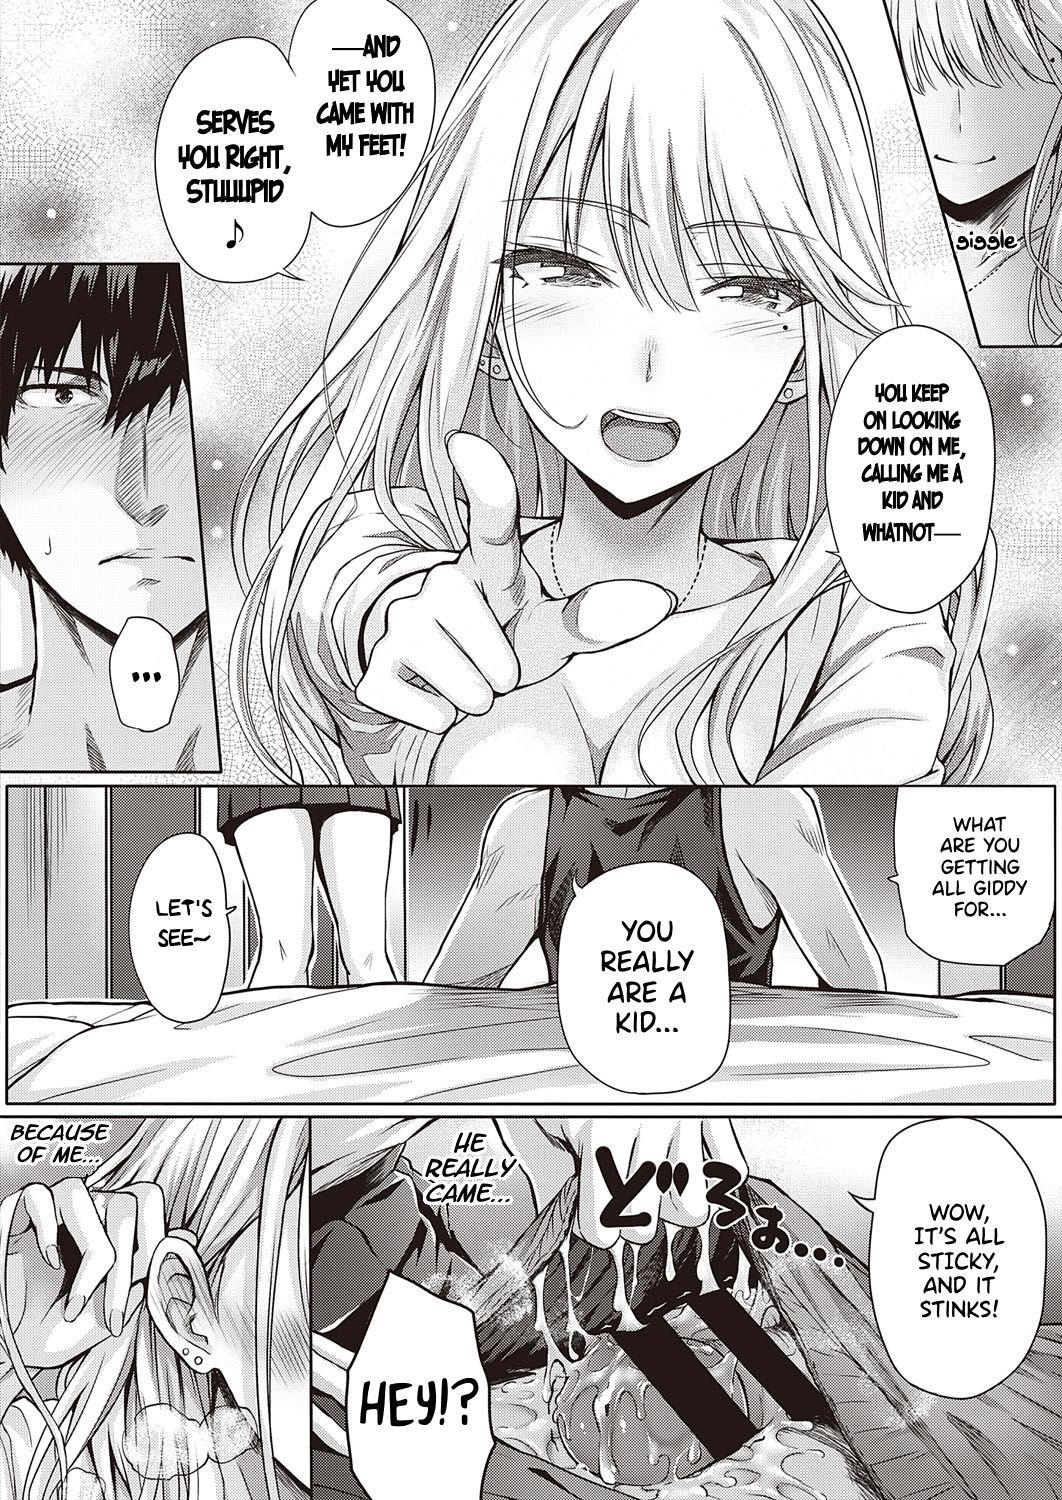 Brunet Re:Hatsukoi | Re:First Love Bang - Page 10